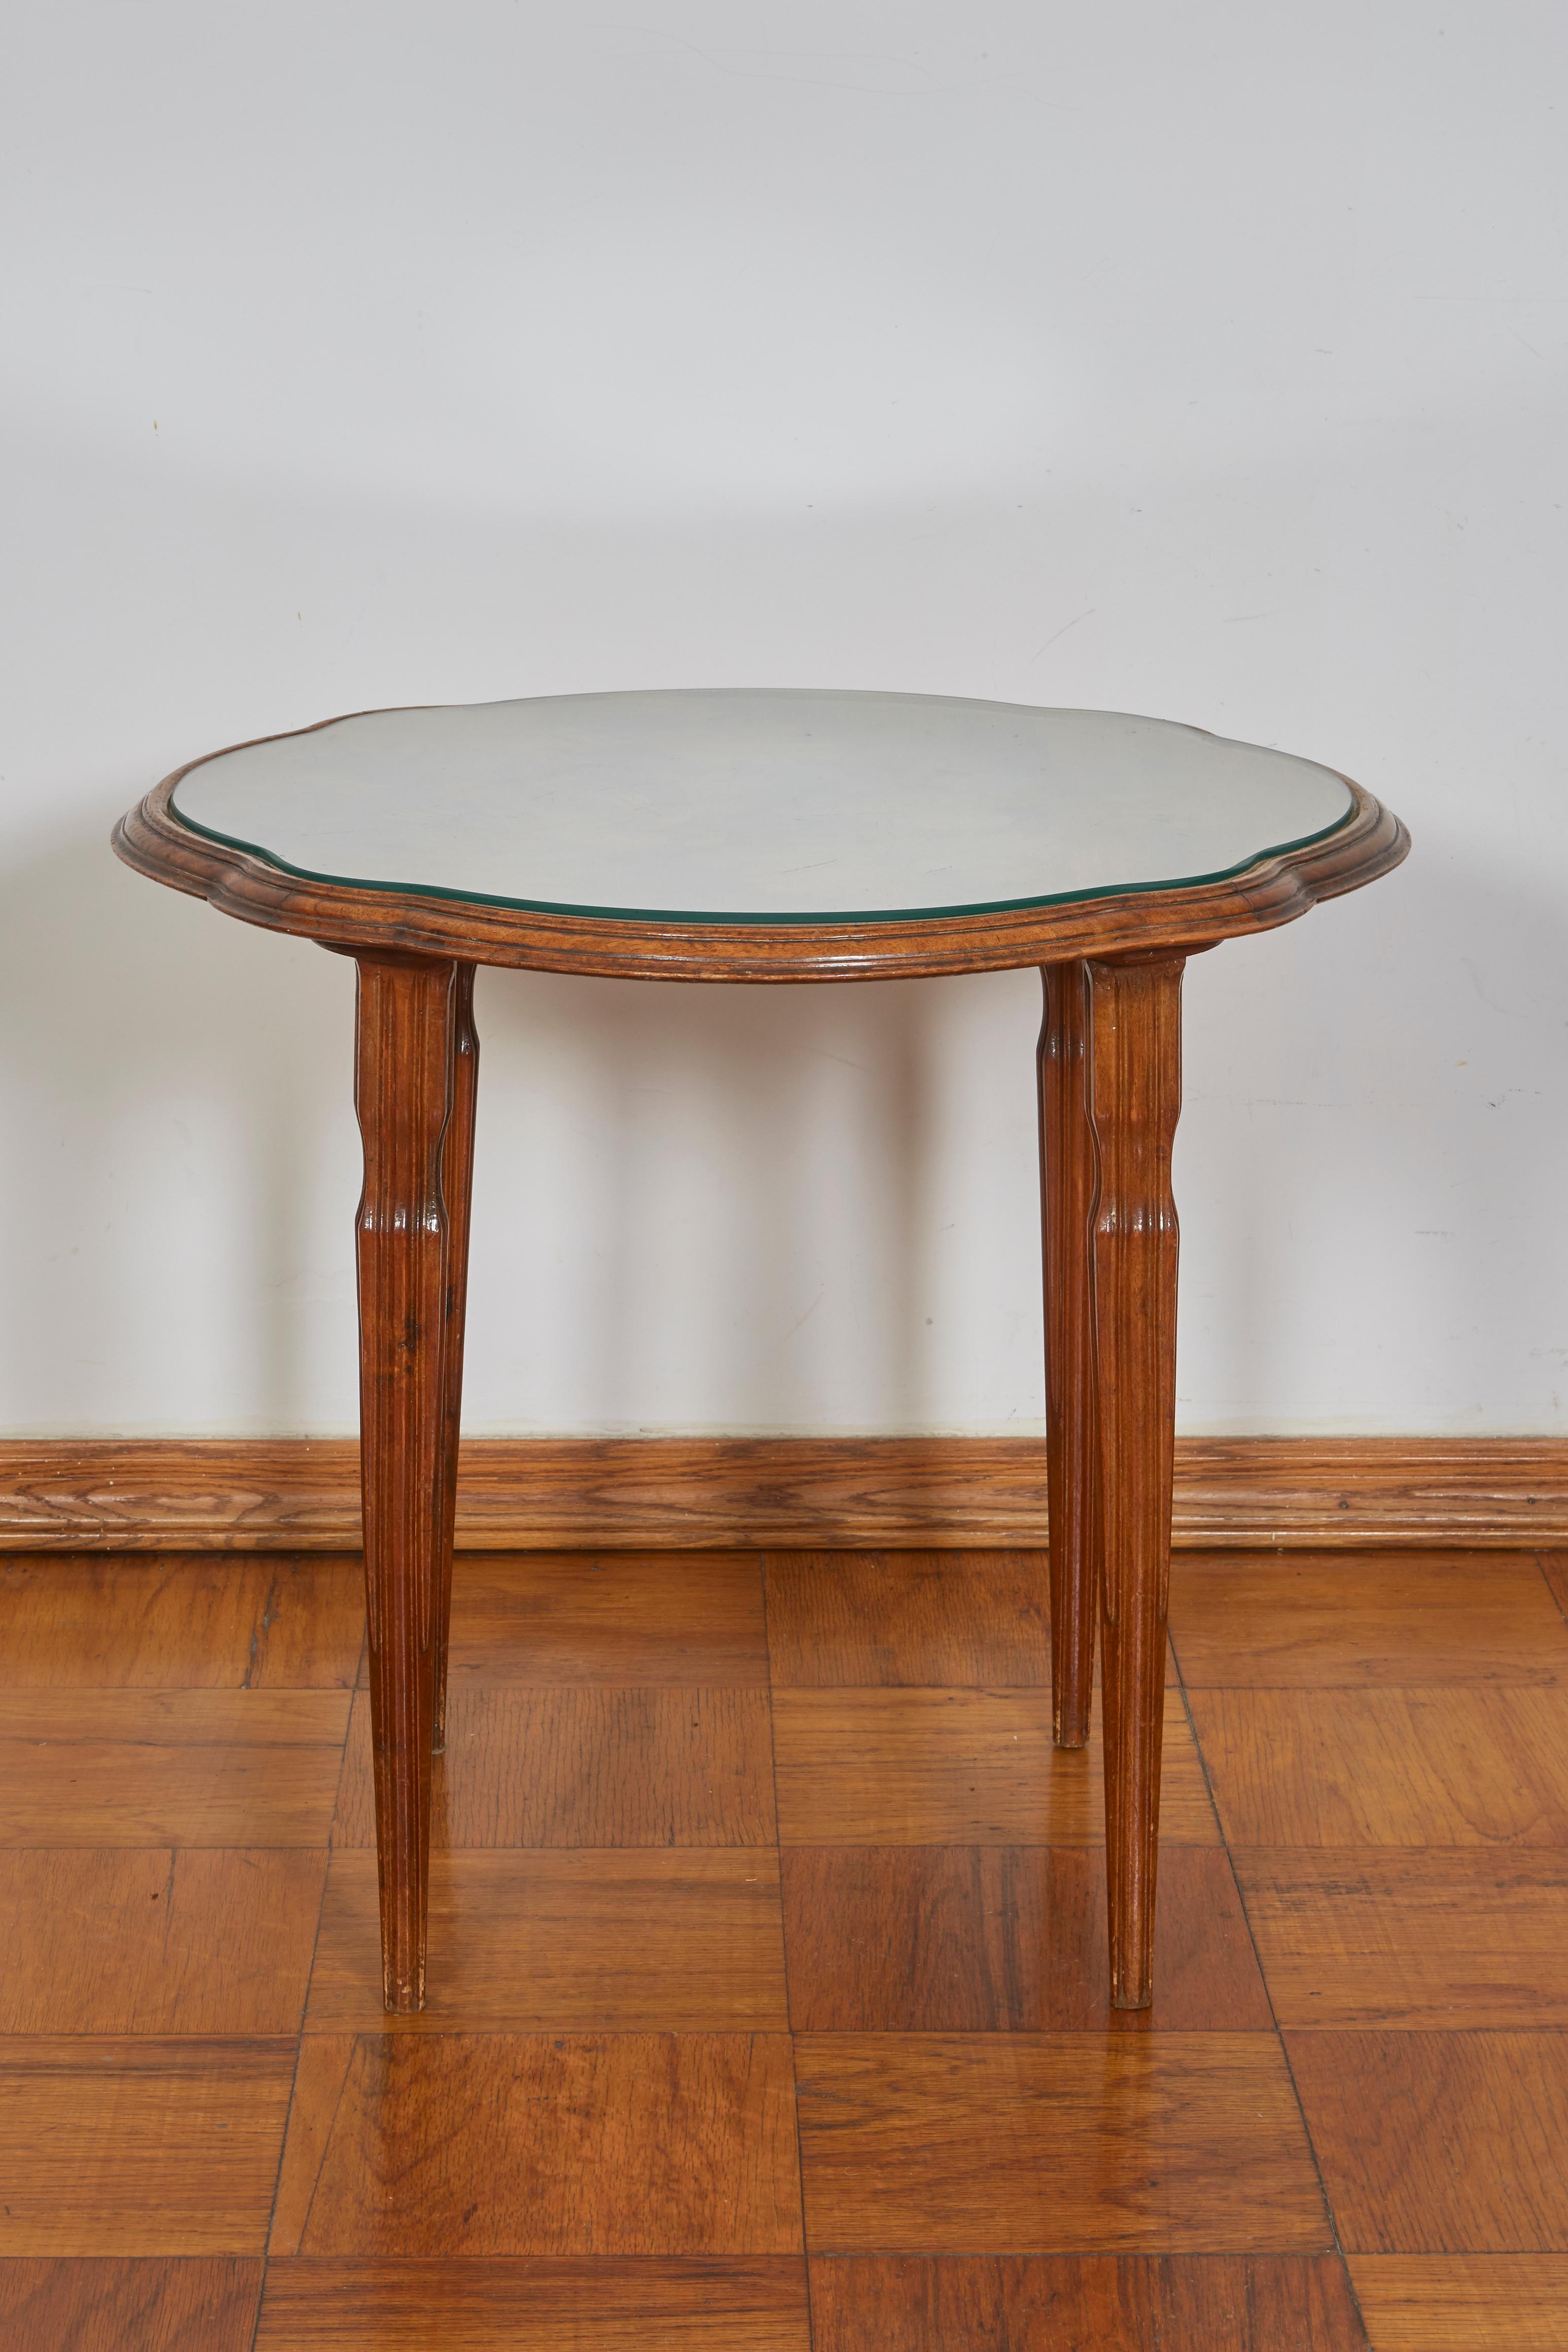 Marquetry Emile Galle Art Nouveau Round Low Table